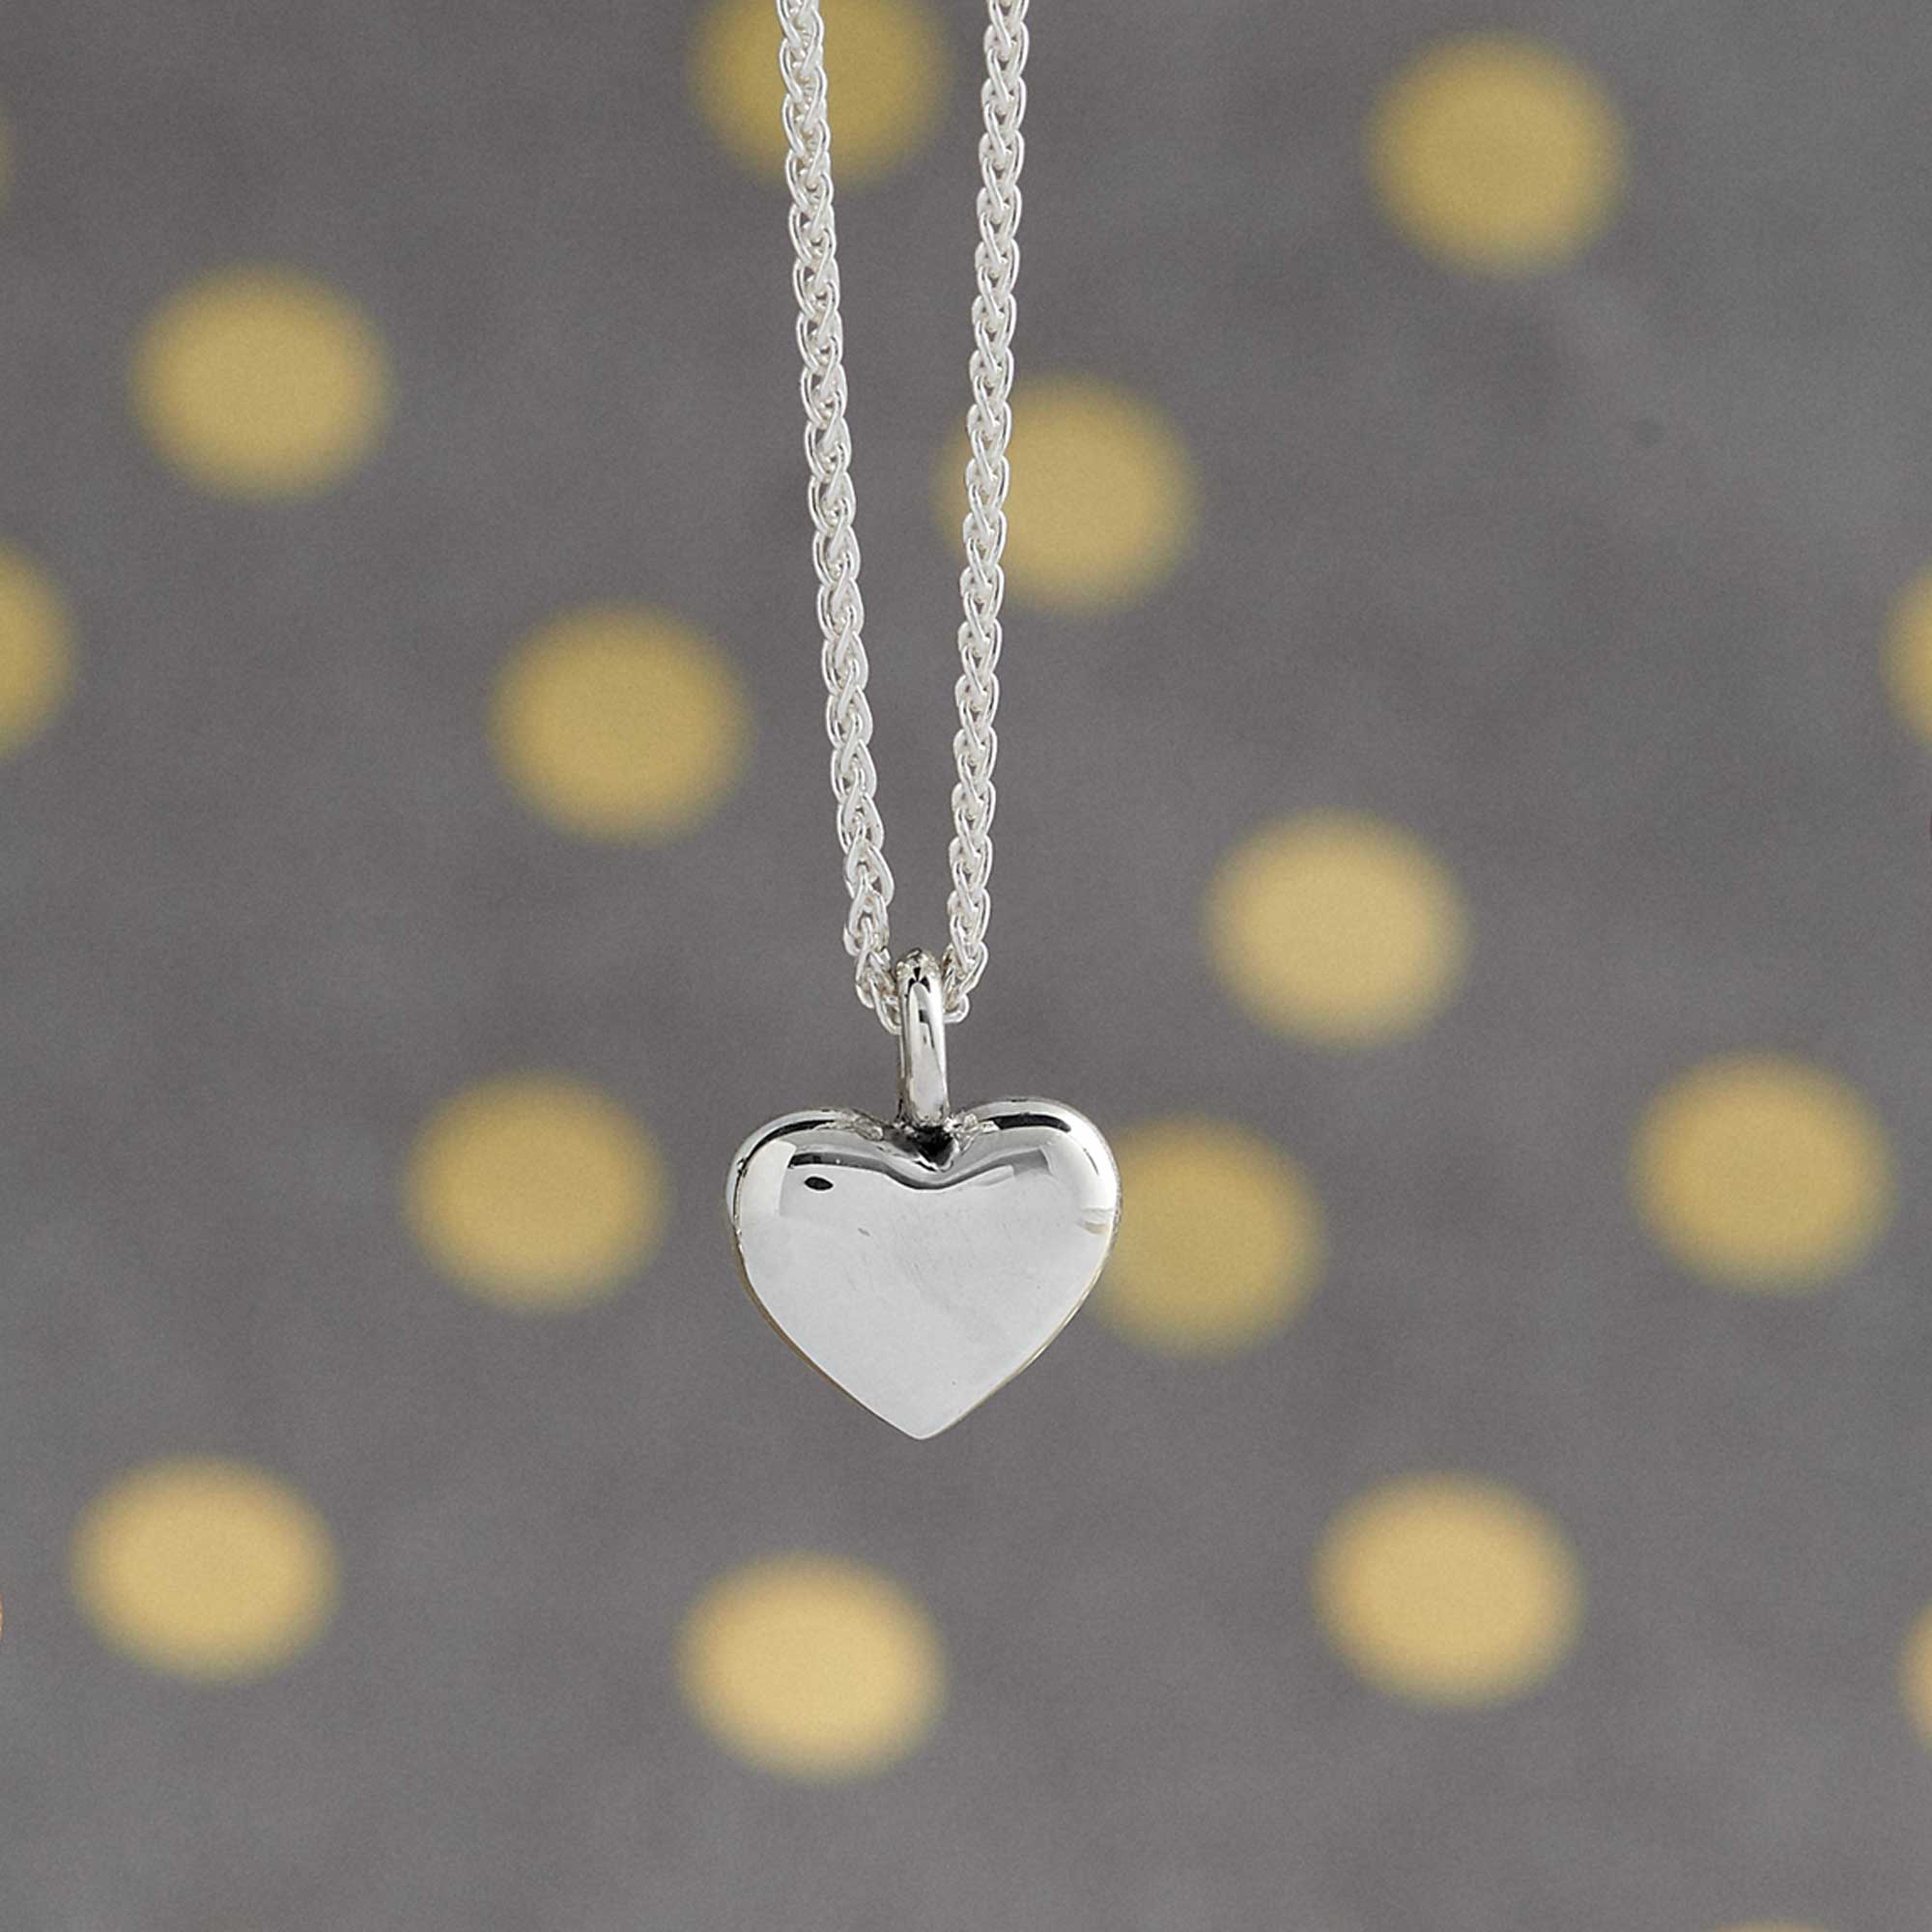 Buy Accessorize London Silver Textured Heart Pendant Necklace Online At  Best Price @ Tata CLiQ